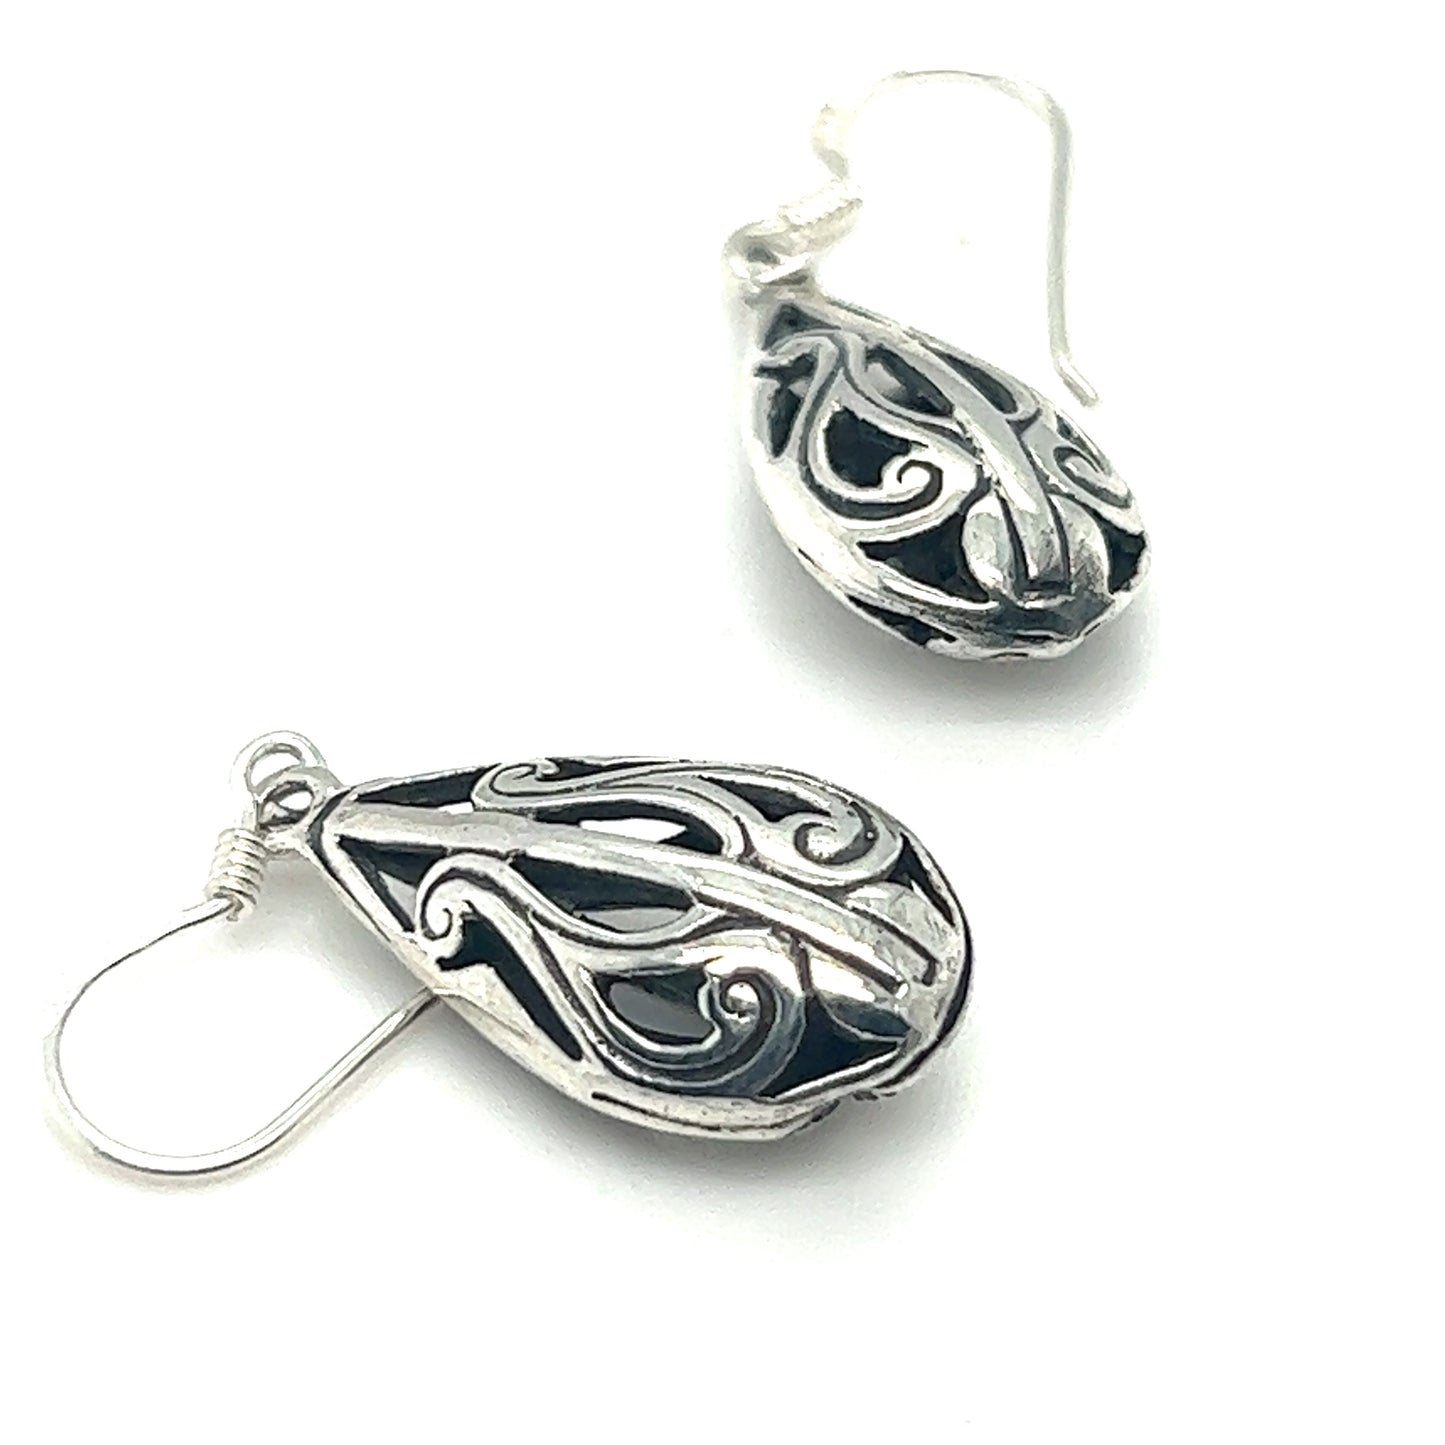 A pair of Super Silver Filigree Teardrop Earrings, perfect for adding a boho aesthetic to any outfit.